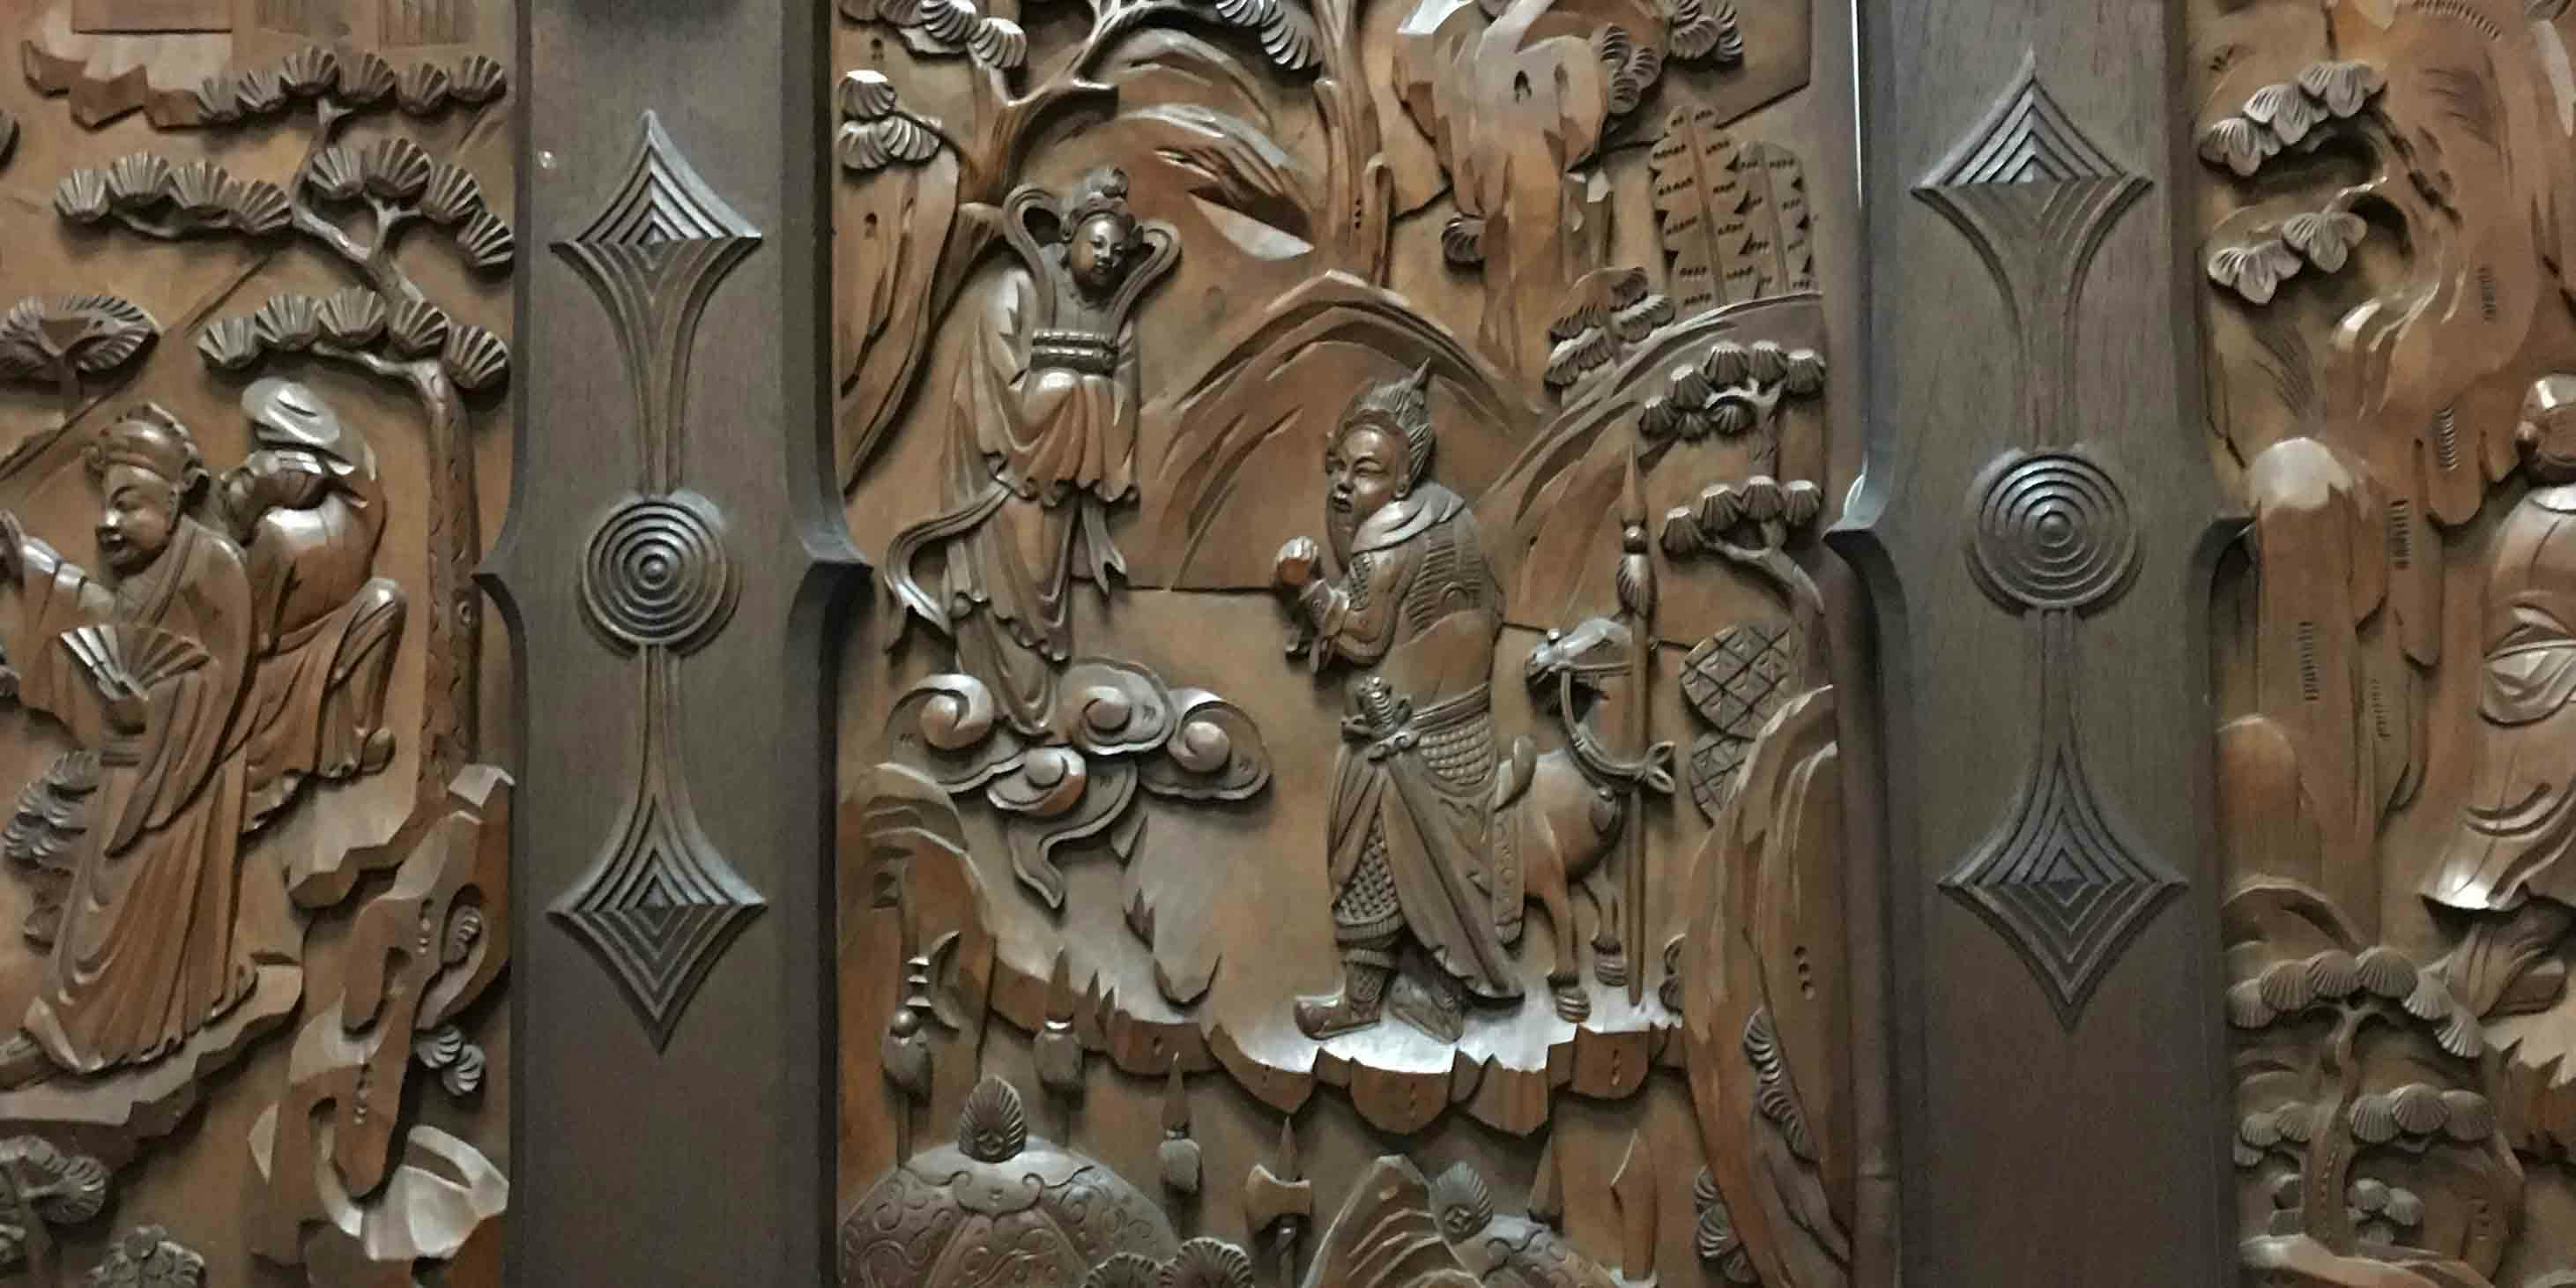 Detail of intricate wood carving, with a man with a sword and a horse depicted